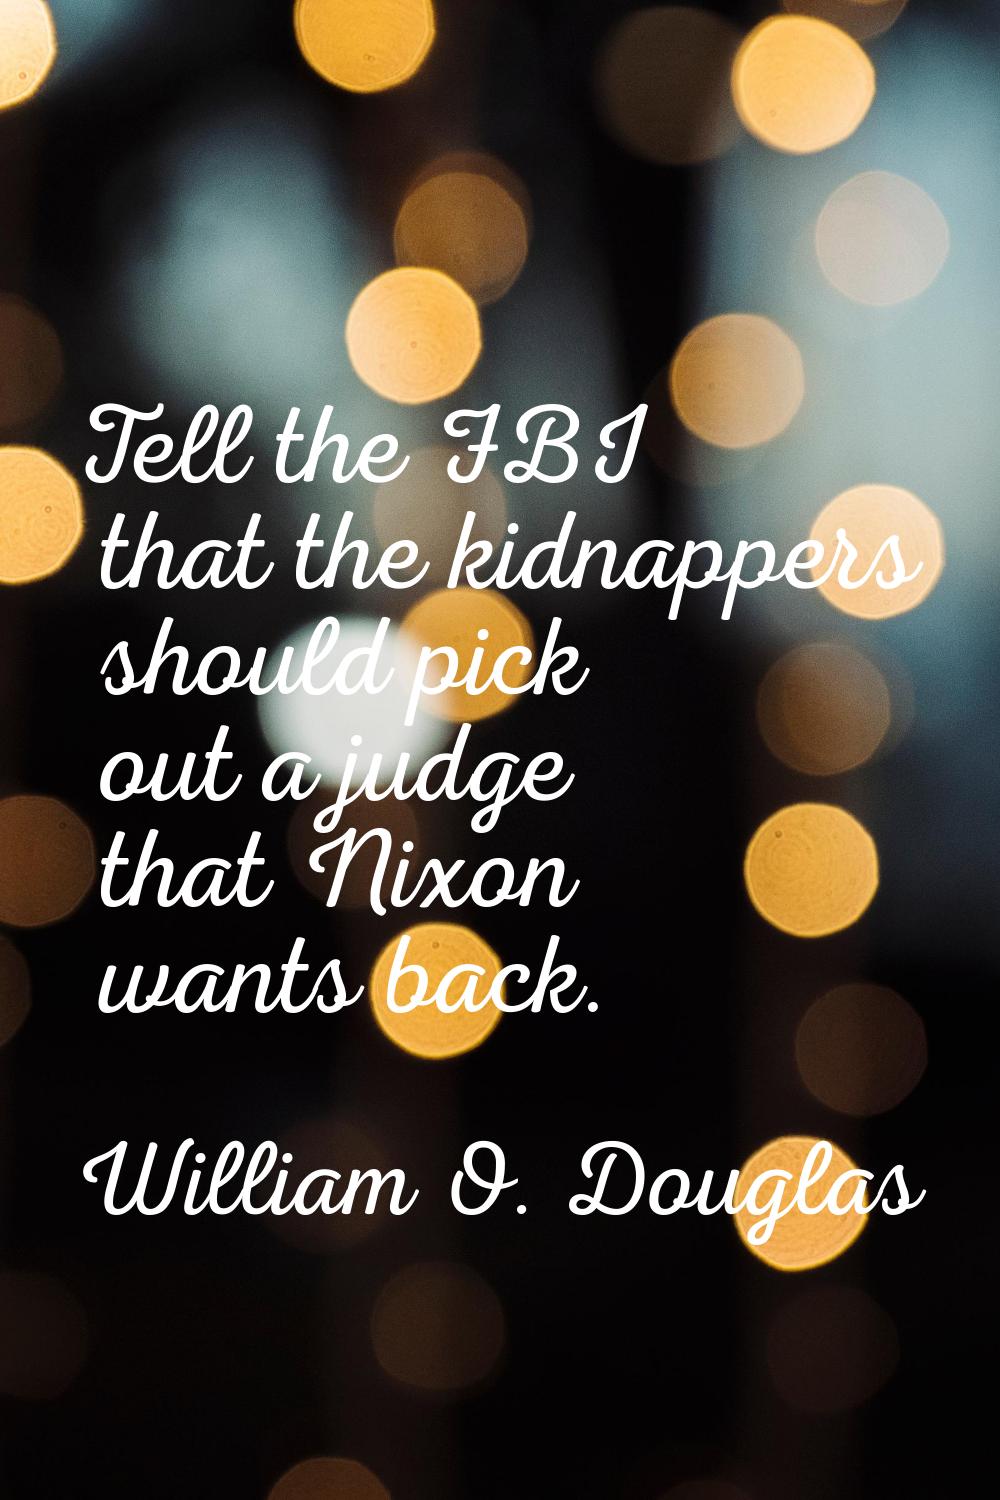 Tell the FBI that the kidnappers should pick out a judge that Nixon wants back.